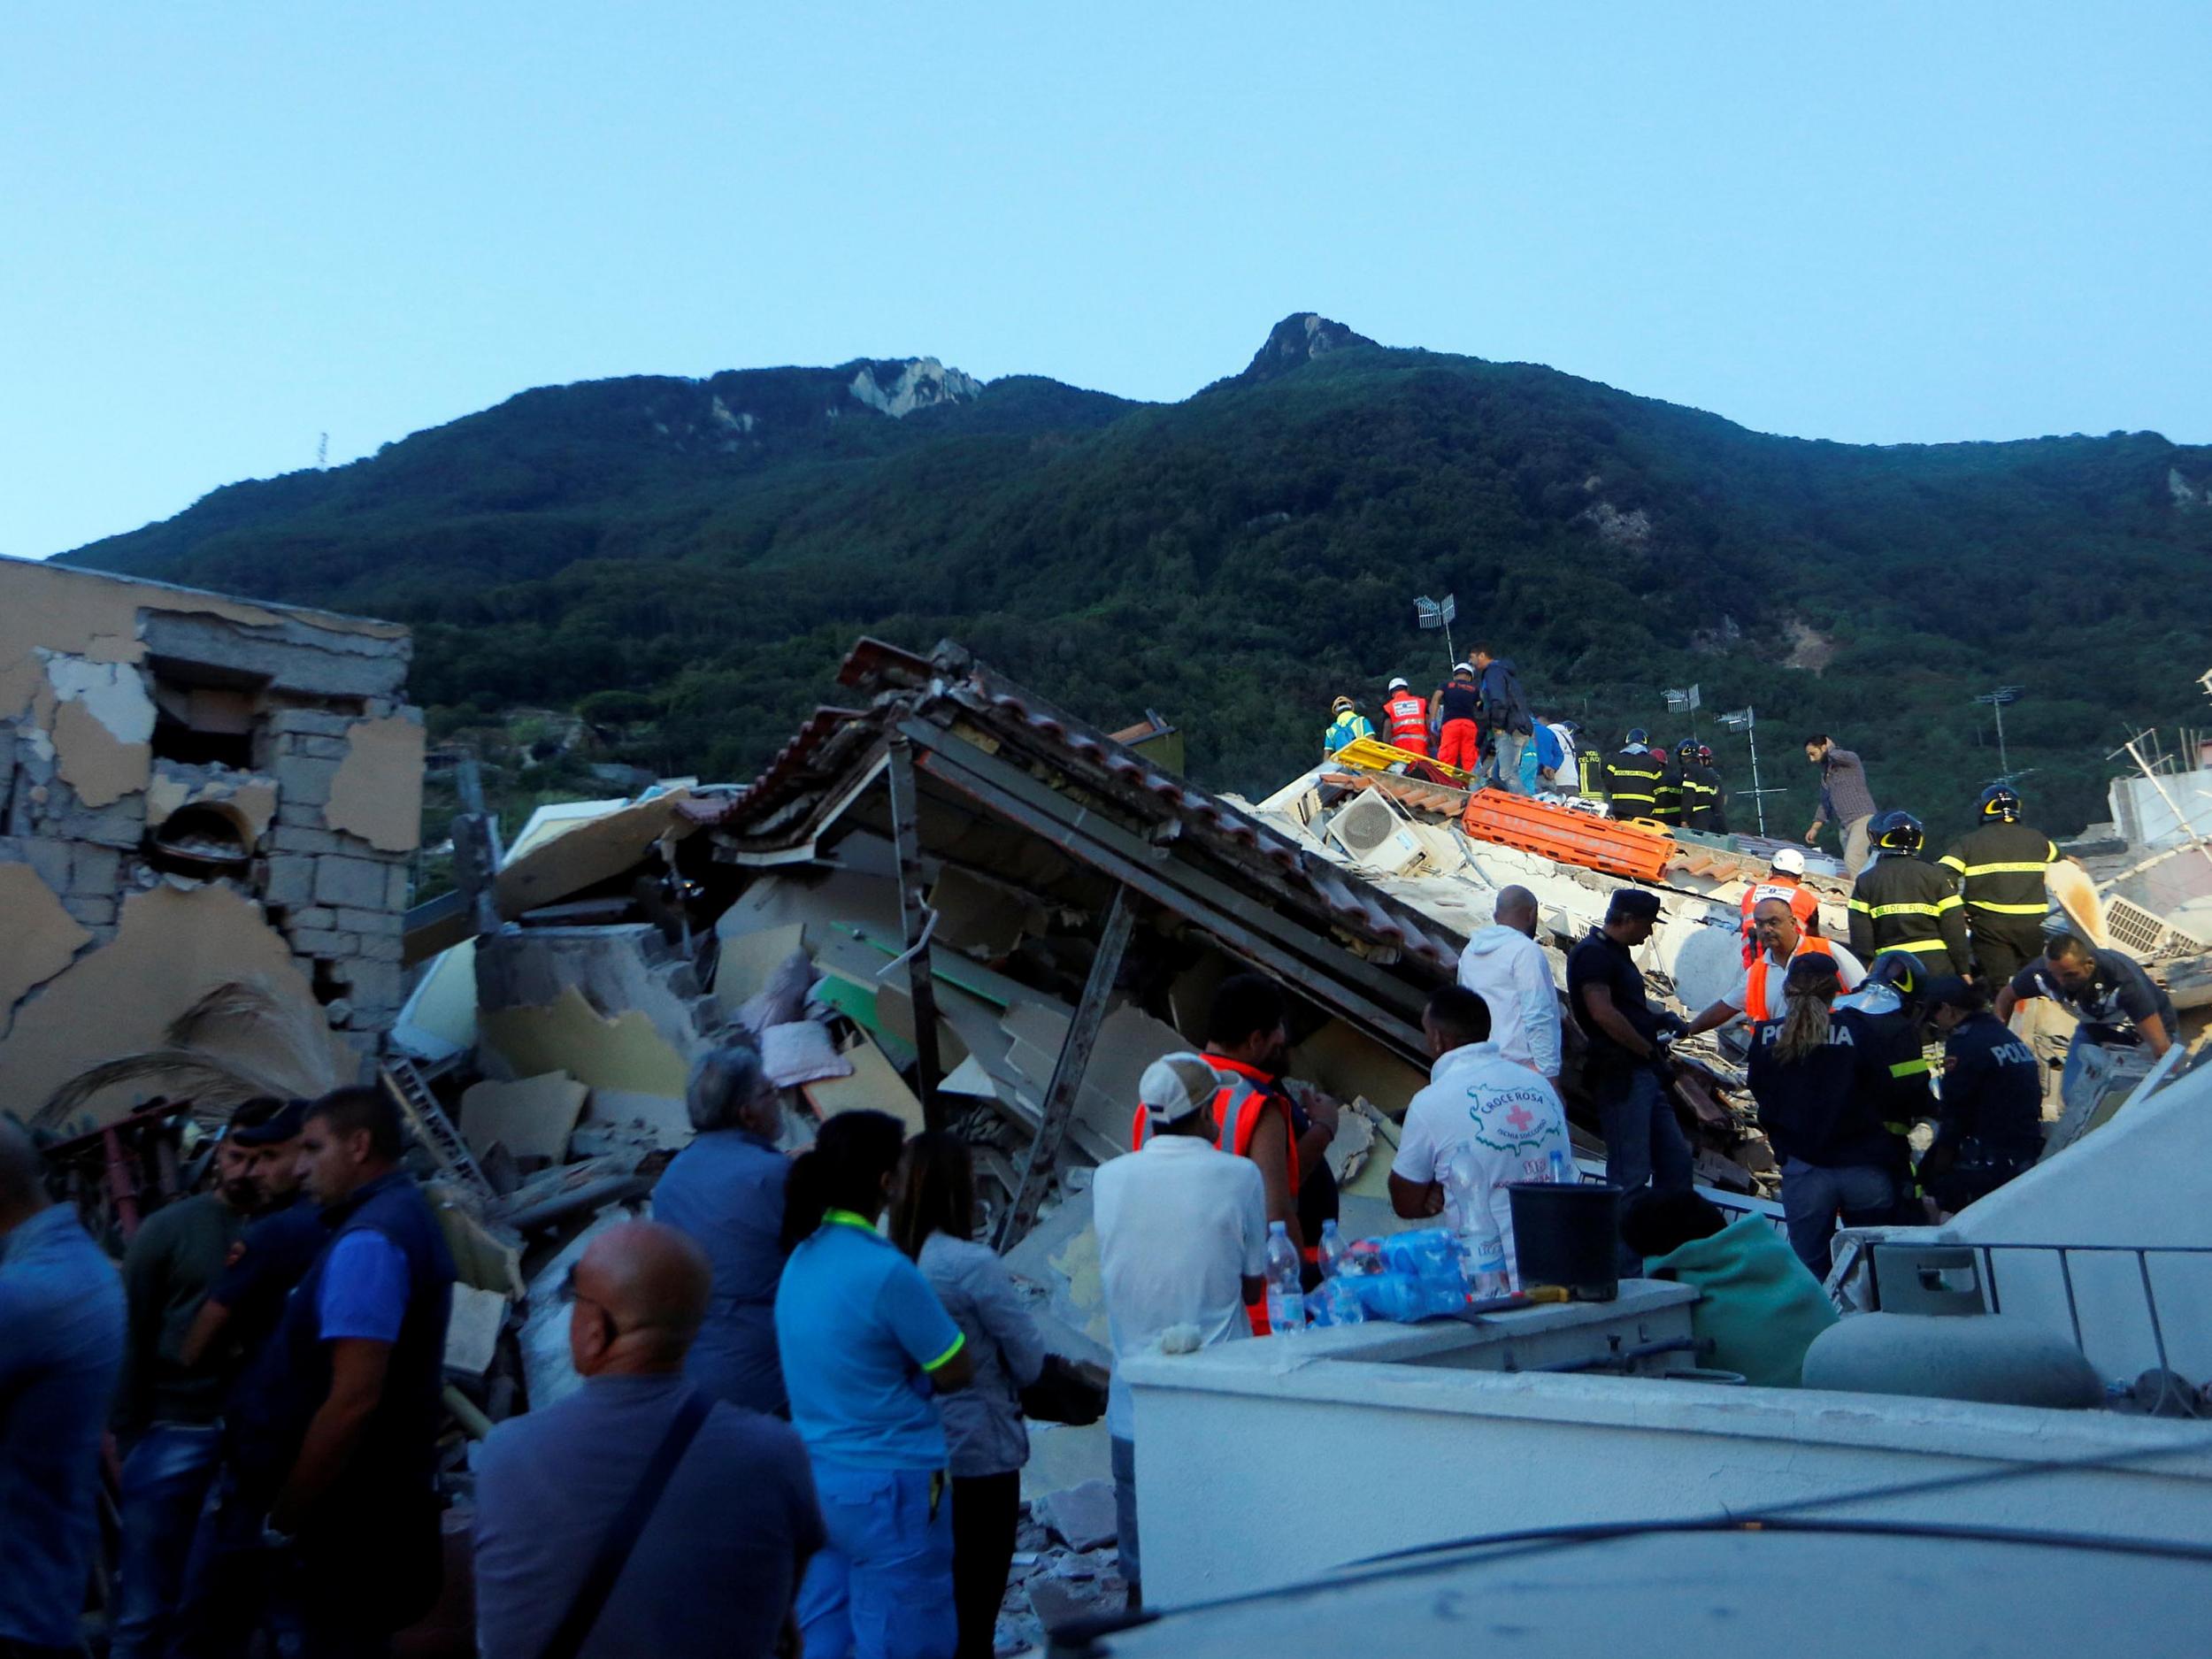 Rescue workers check a collapsed house after an earthquake hit the island of Ischia